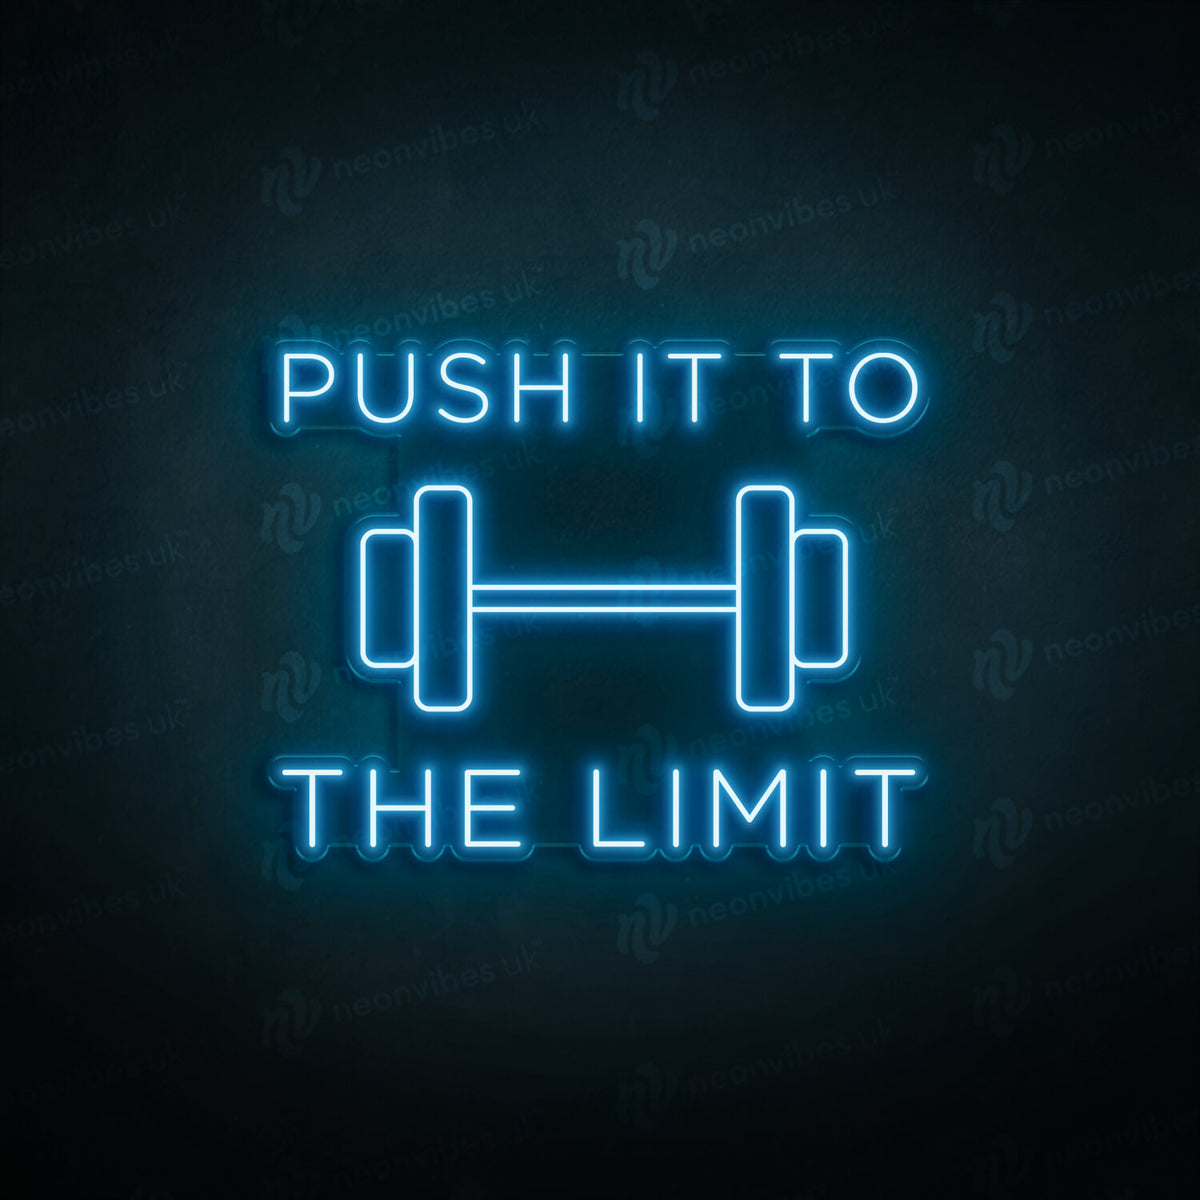 Push It To The Limit neon sign